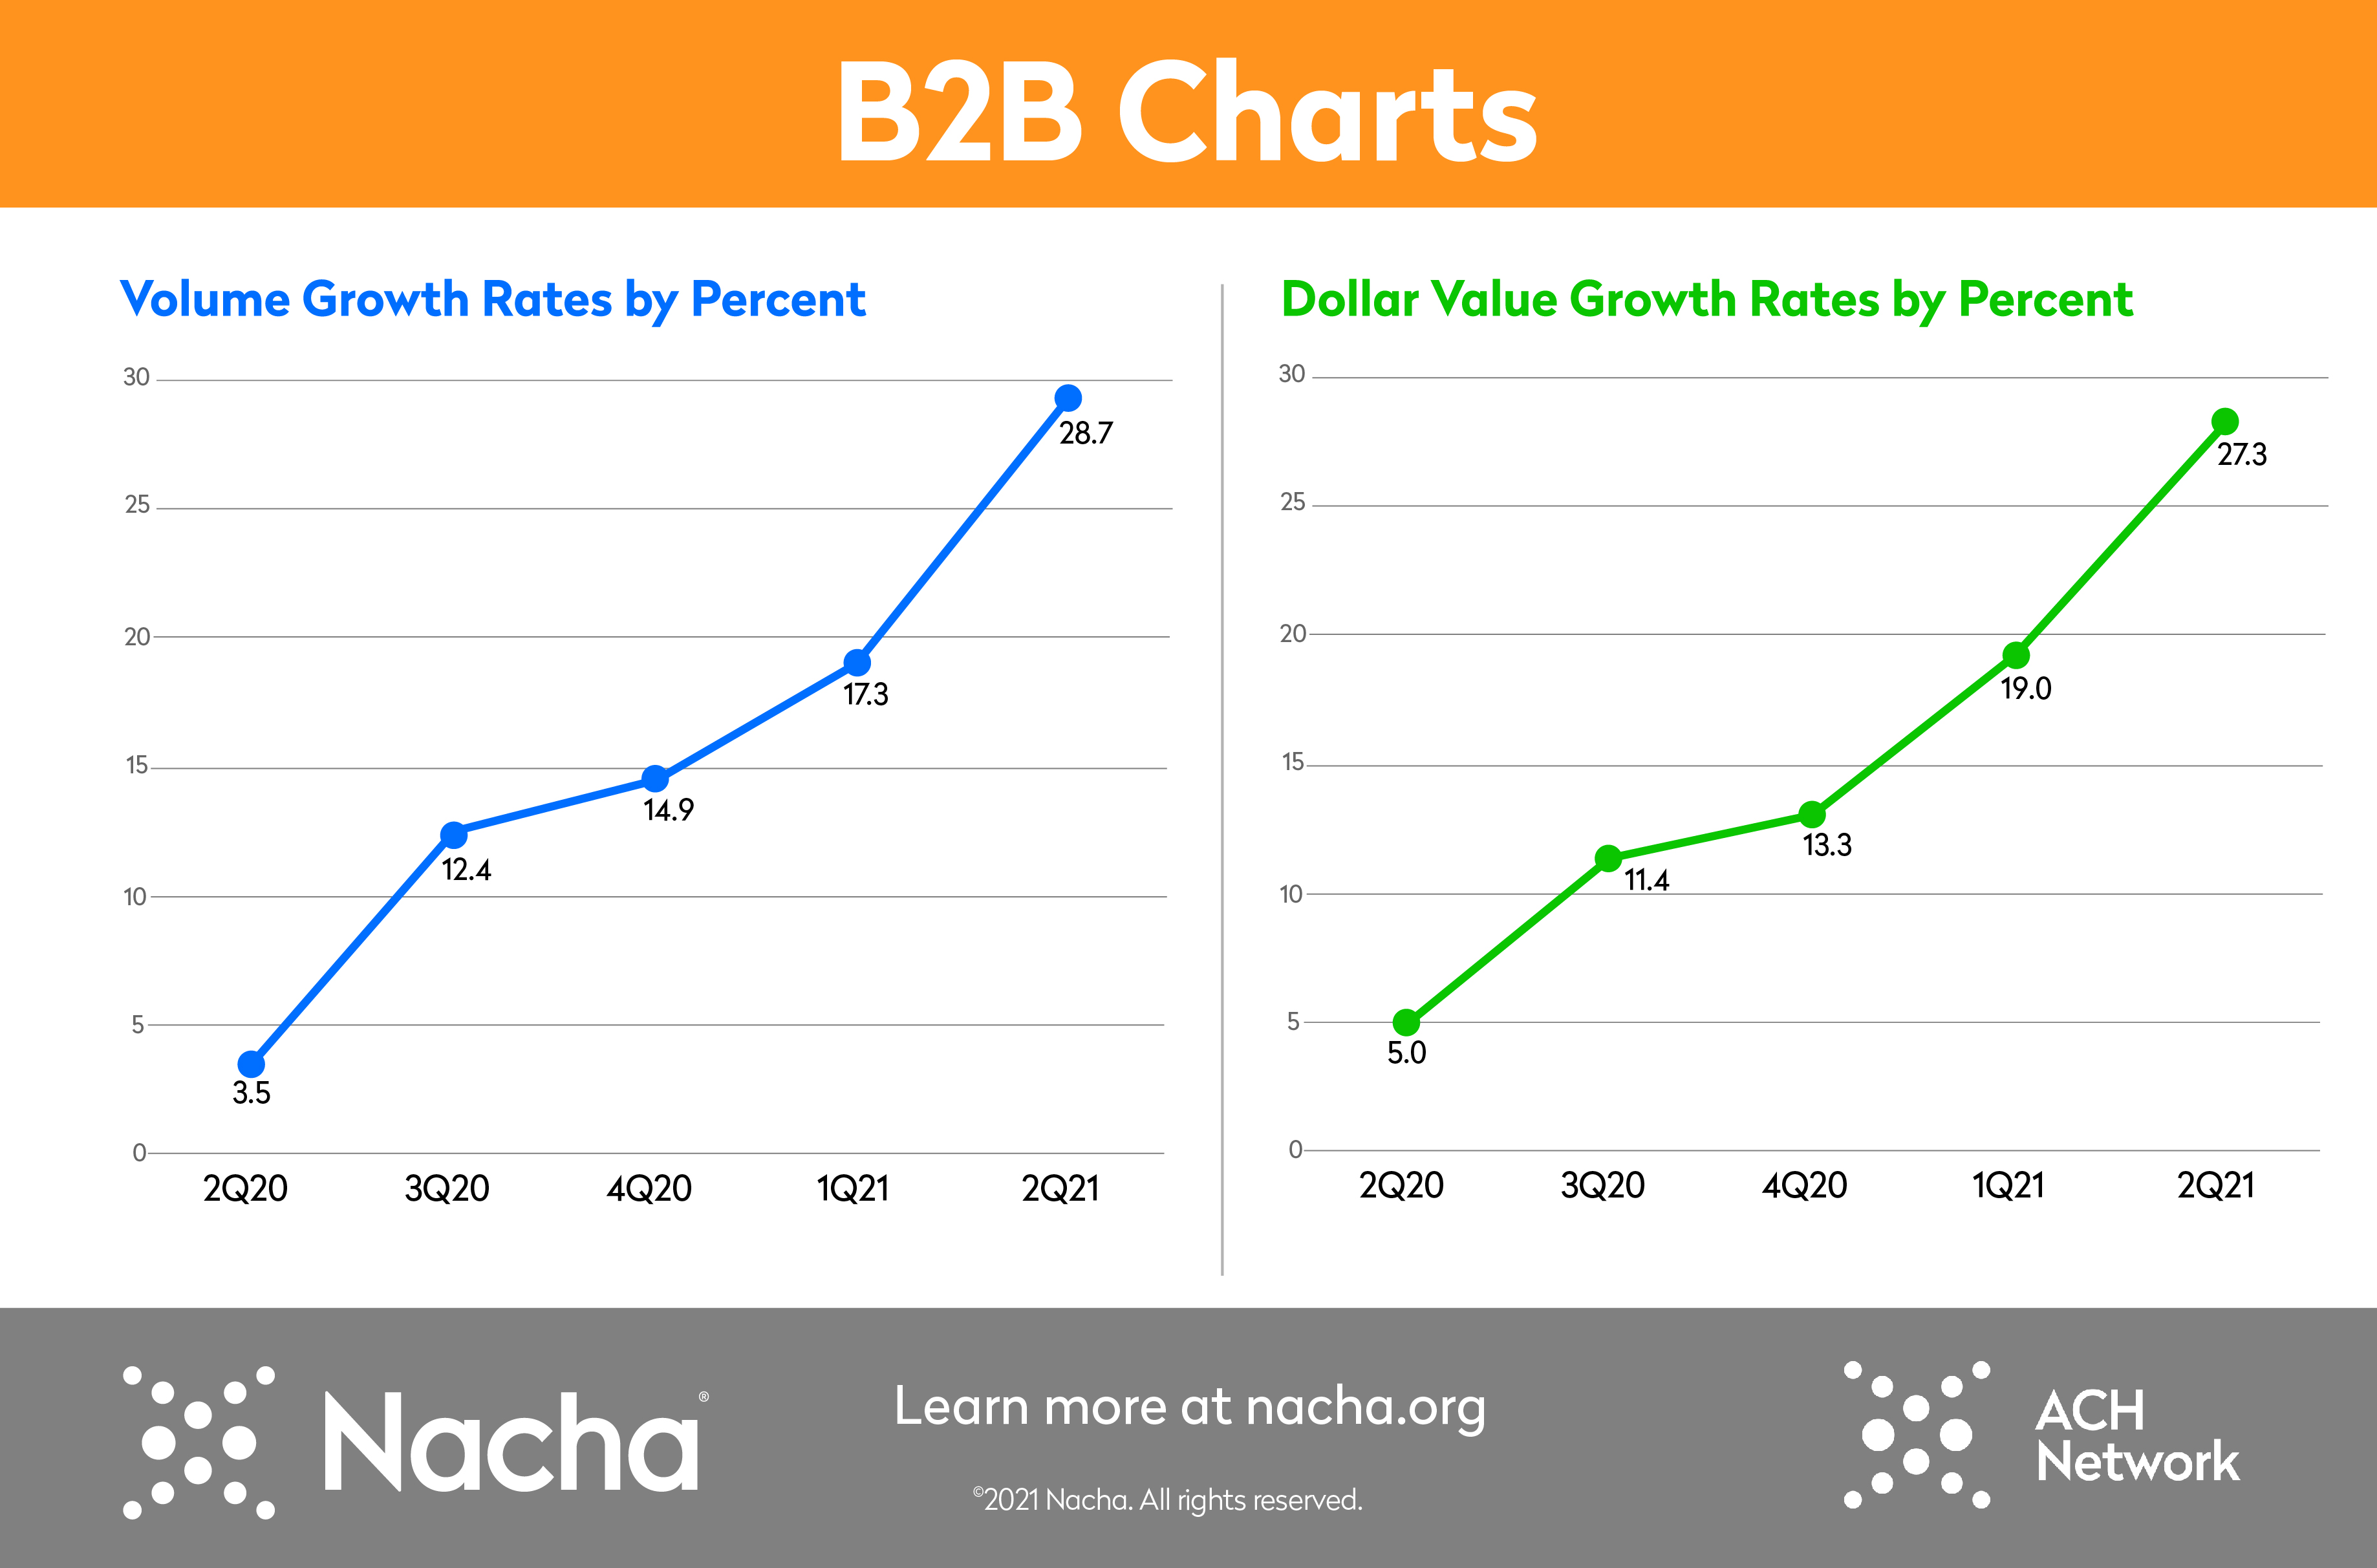 charts showing b2b volume and value growth